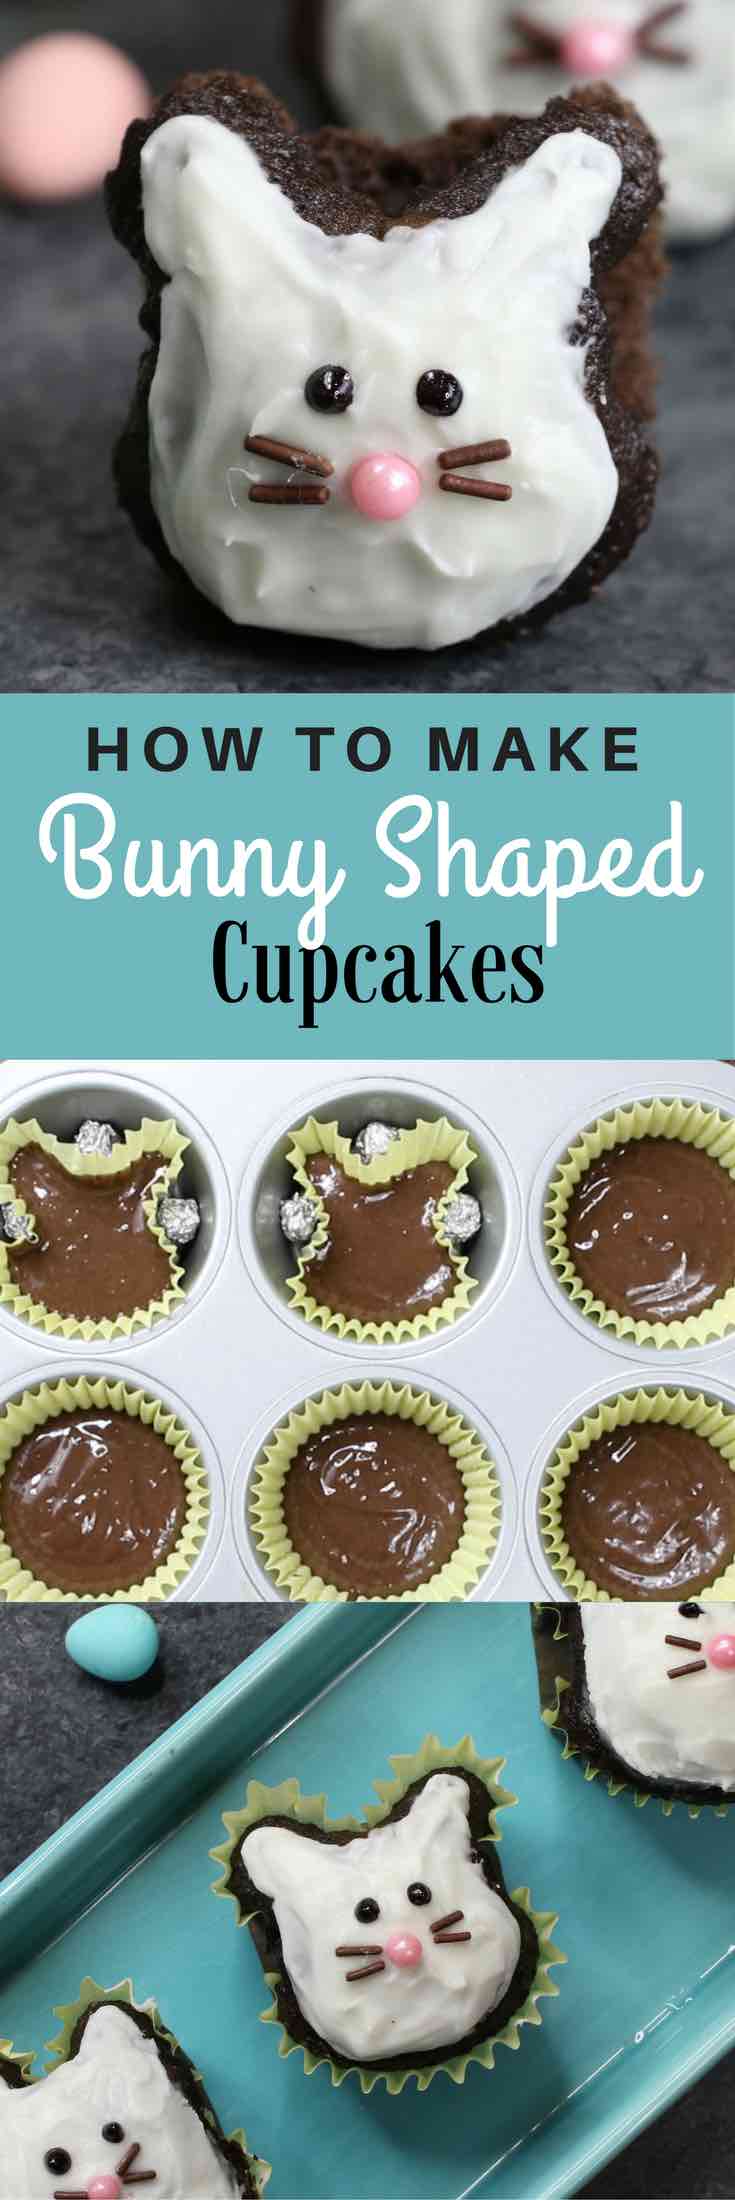 Bunny-themed Easter Cupcakes– made using a muffin tin and foil or marbles, easiest trick ever! A cute and simple recipe that turns brownie into bunny shaped cupcakes, with only a few ingredients: brownie mix, icing and decorating sprinkles. Great for Easter parties, brunch, dessert or an afternoon snack! Party food, party dessert recipes. Video recipe. | Tipbuzz.com